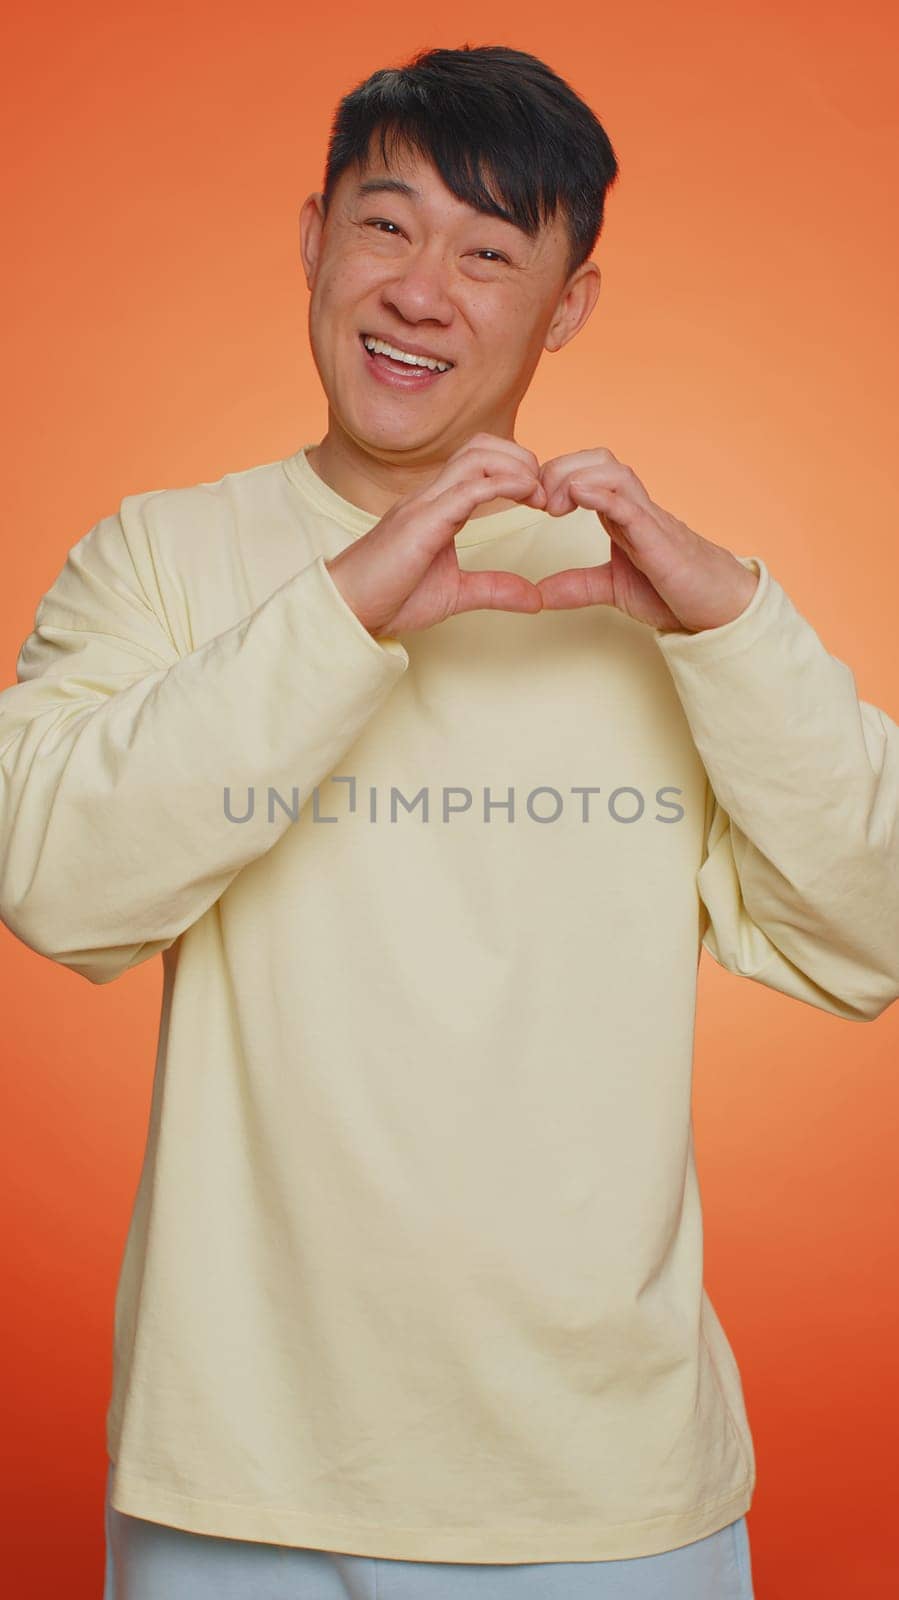 Smiling chinese man makes heart gesture demonstrates love sign expresses good feelings and sympathy by efuror